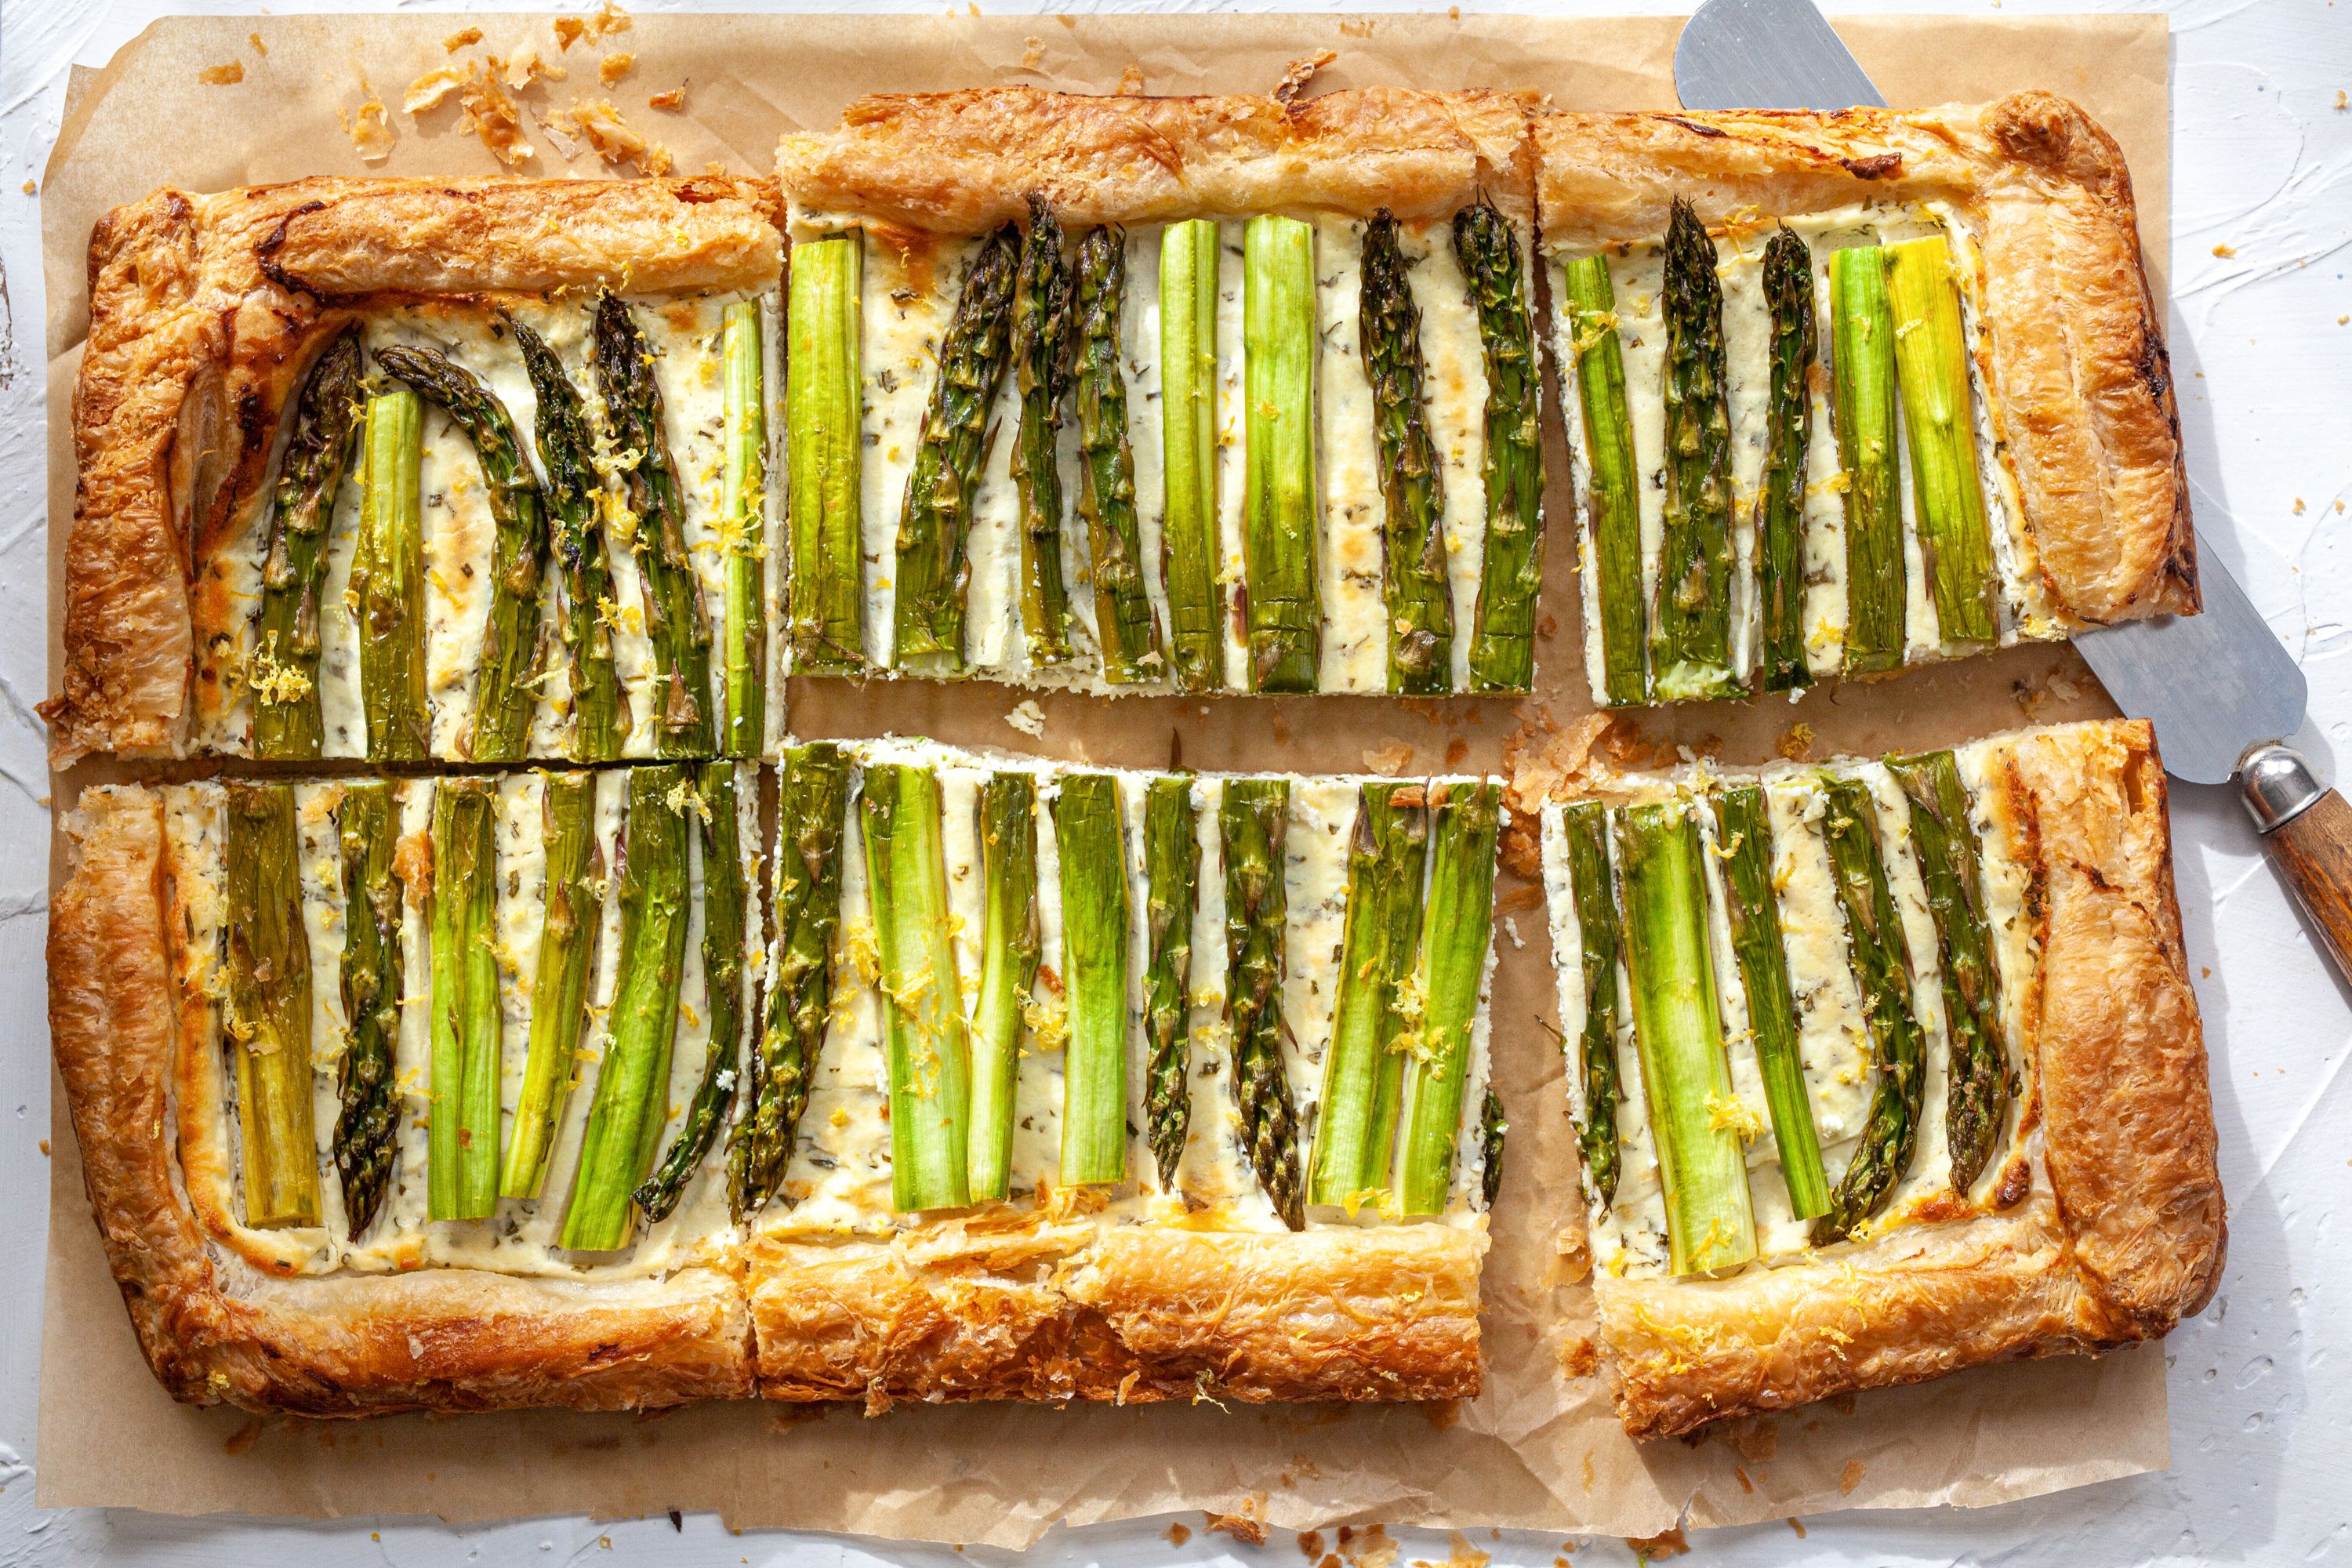 Asparagus Tart with Goat Cheese